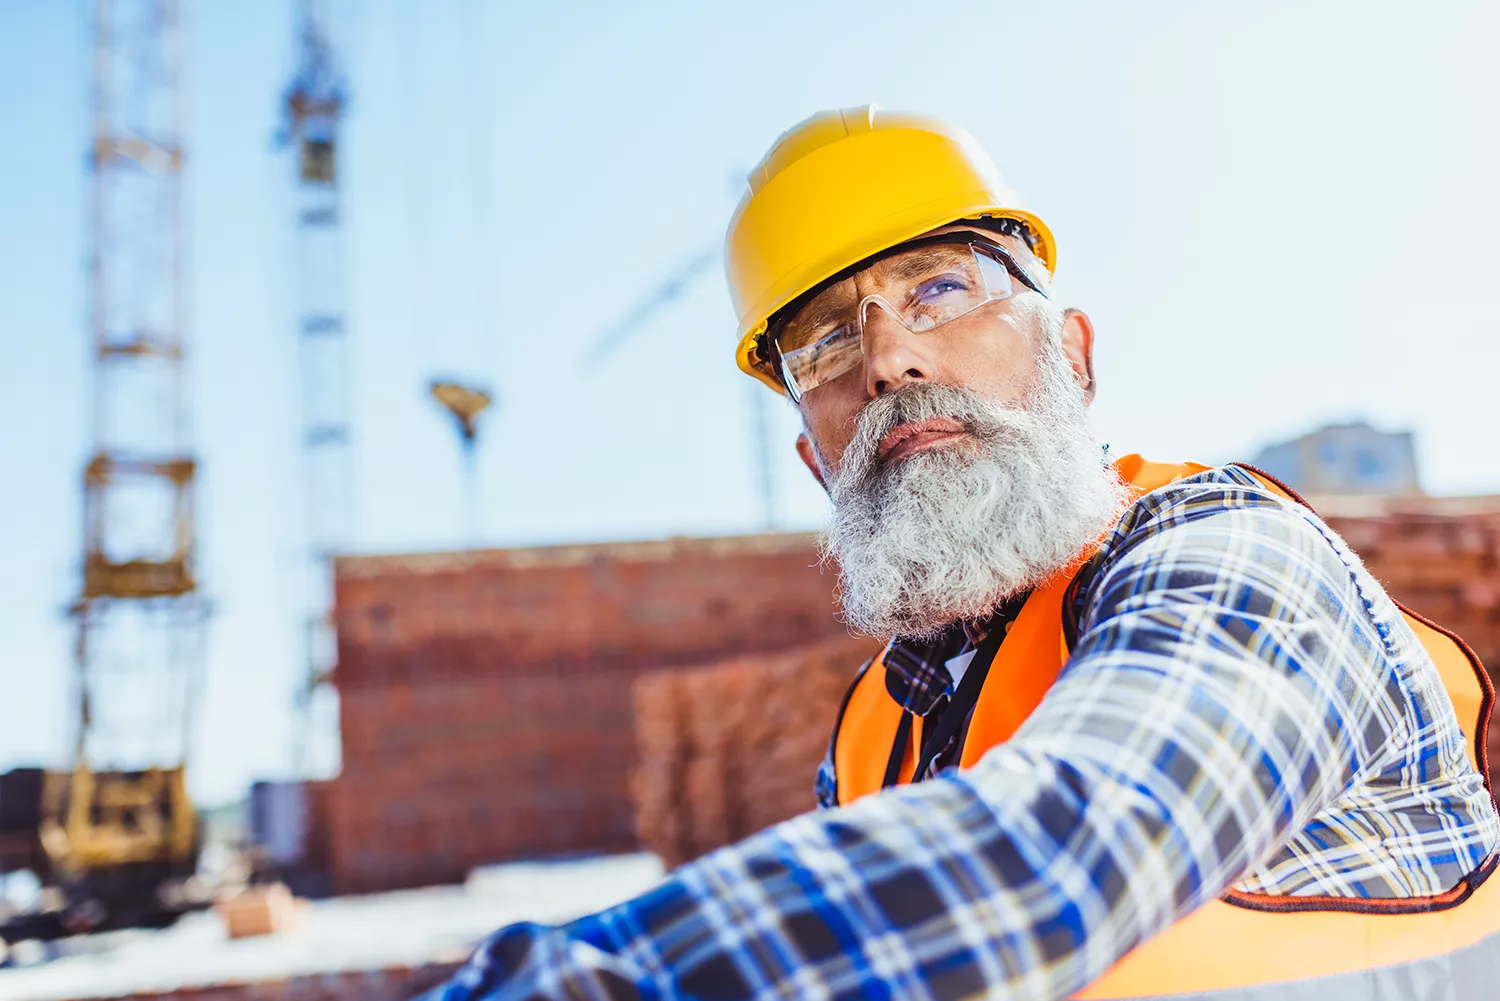 boss thinking of lone worker safety